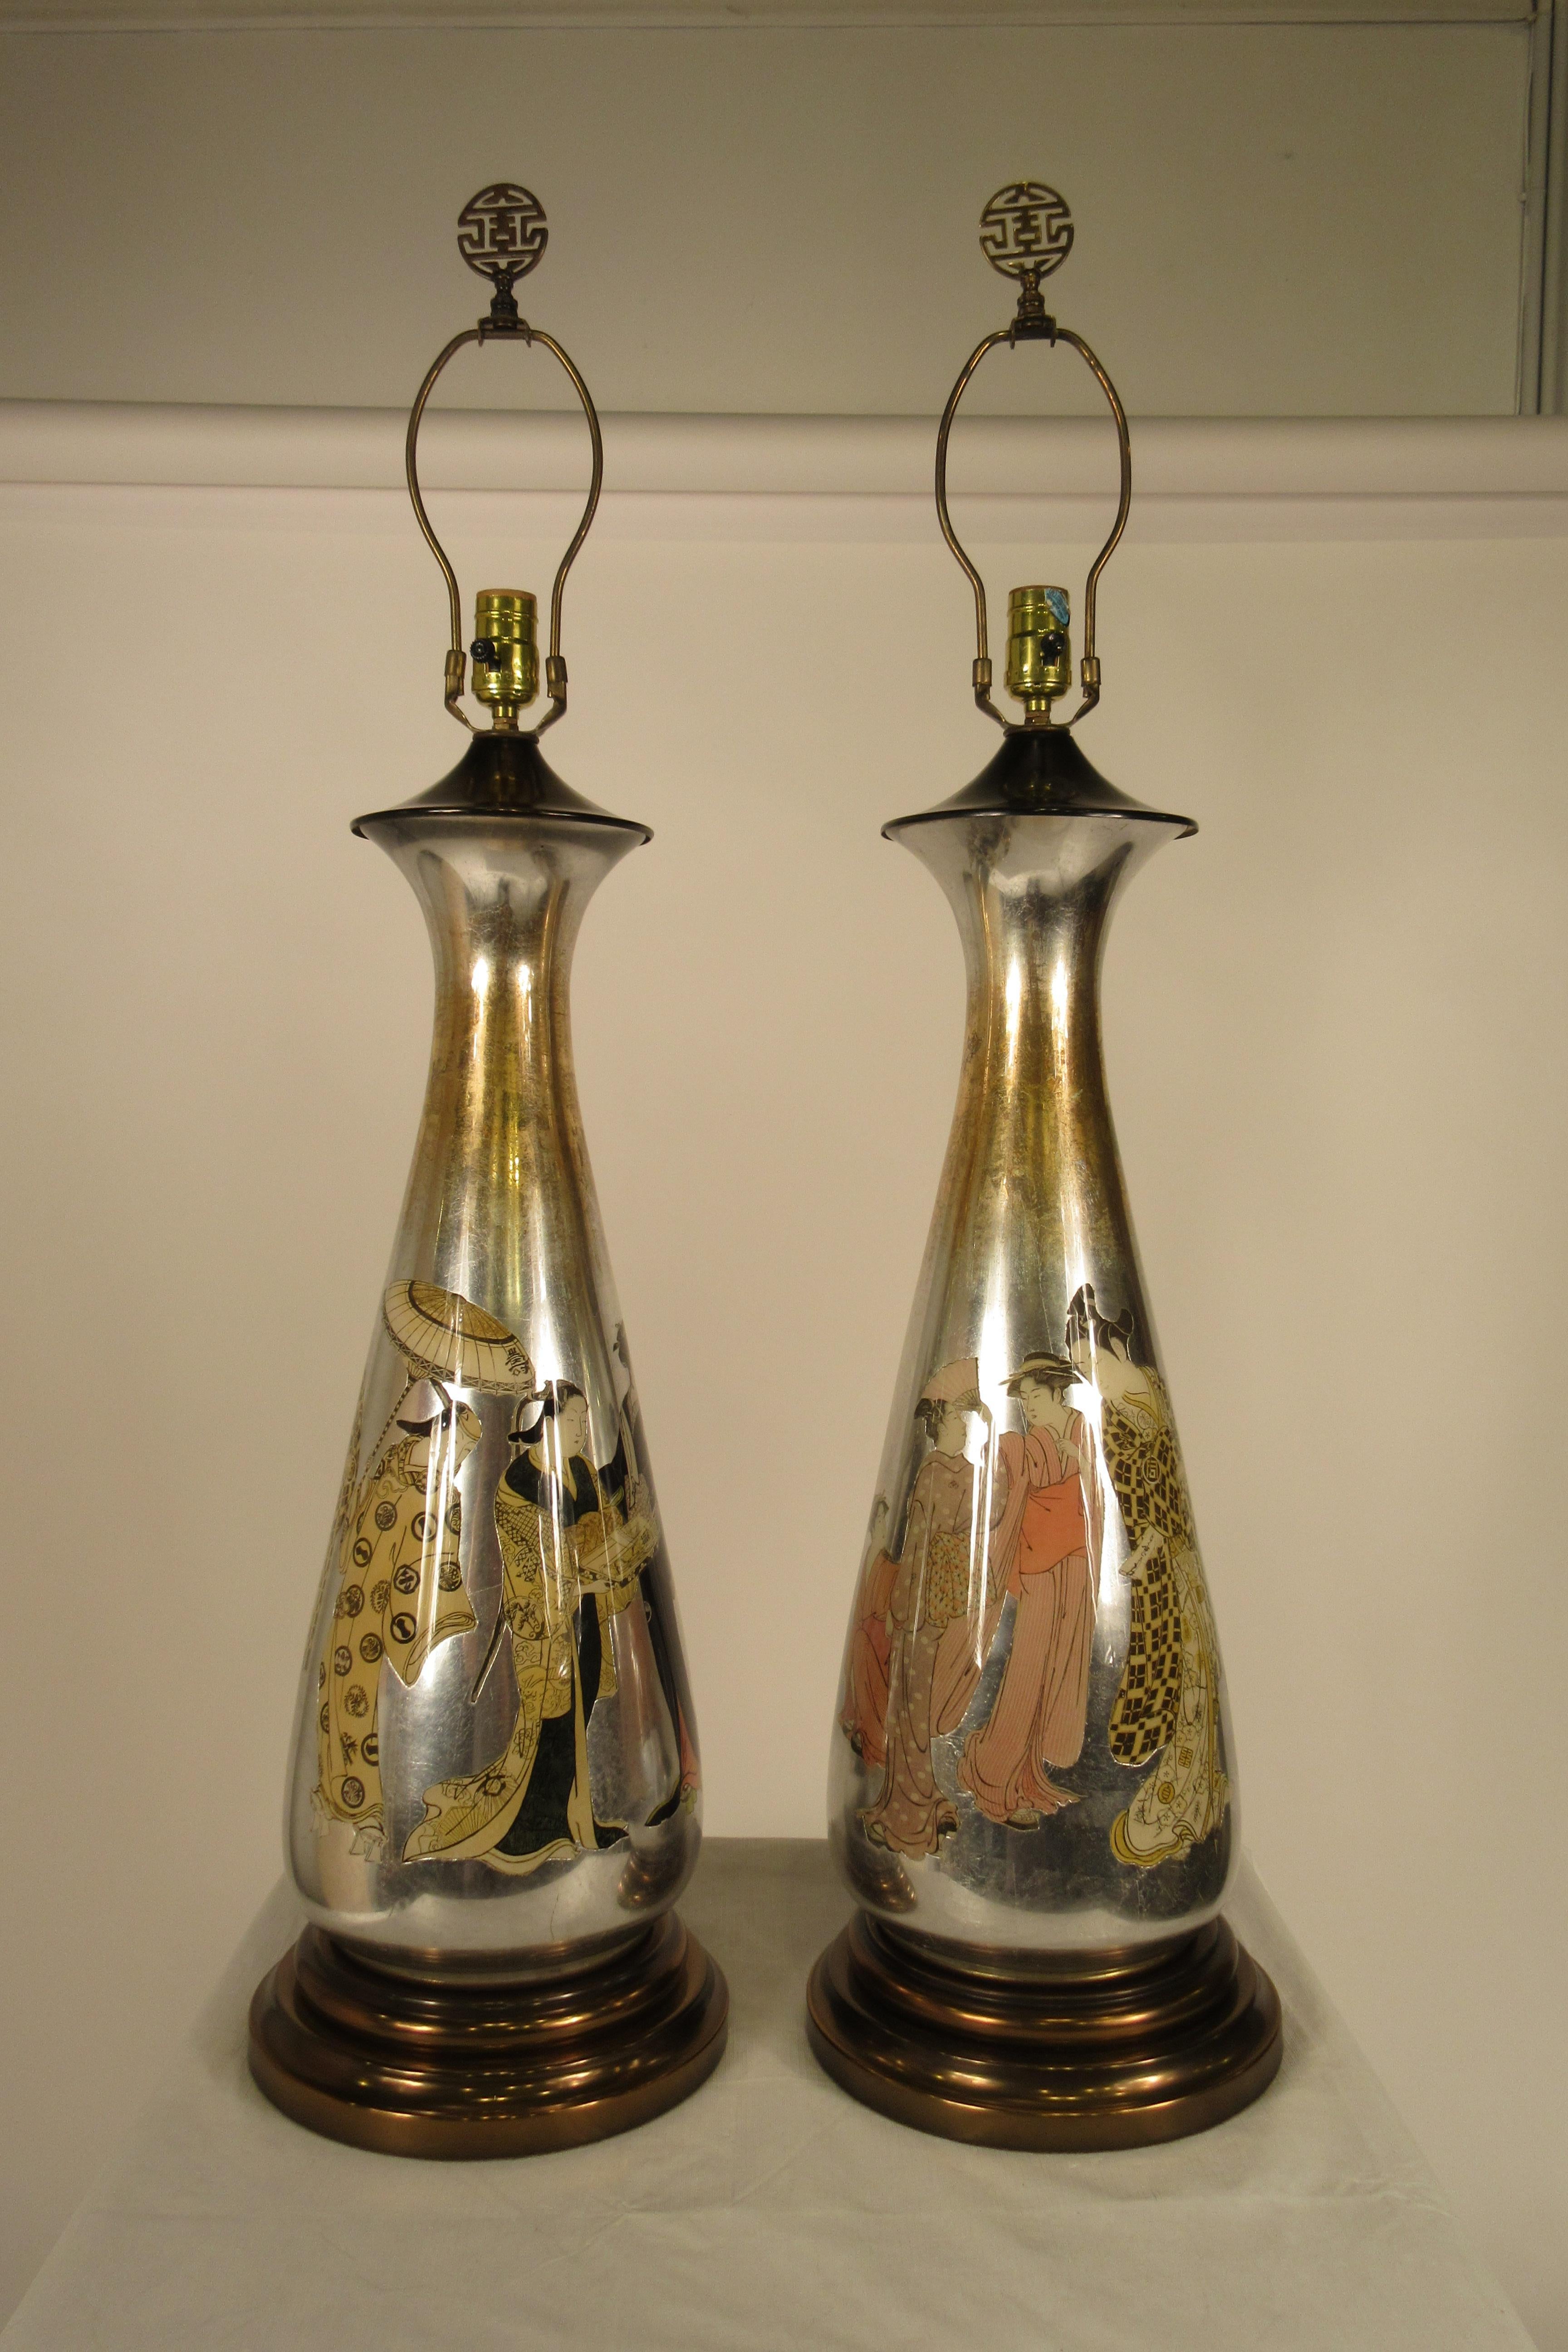 Pair of 1950s tall églomisé silver leaf Asian lamps out of a Scarsdale, NY estate. Lamps have original wiring, needs rewiring.